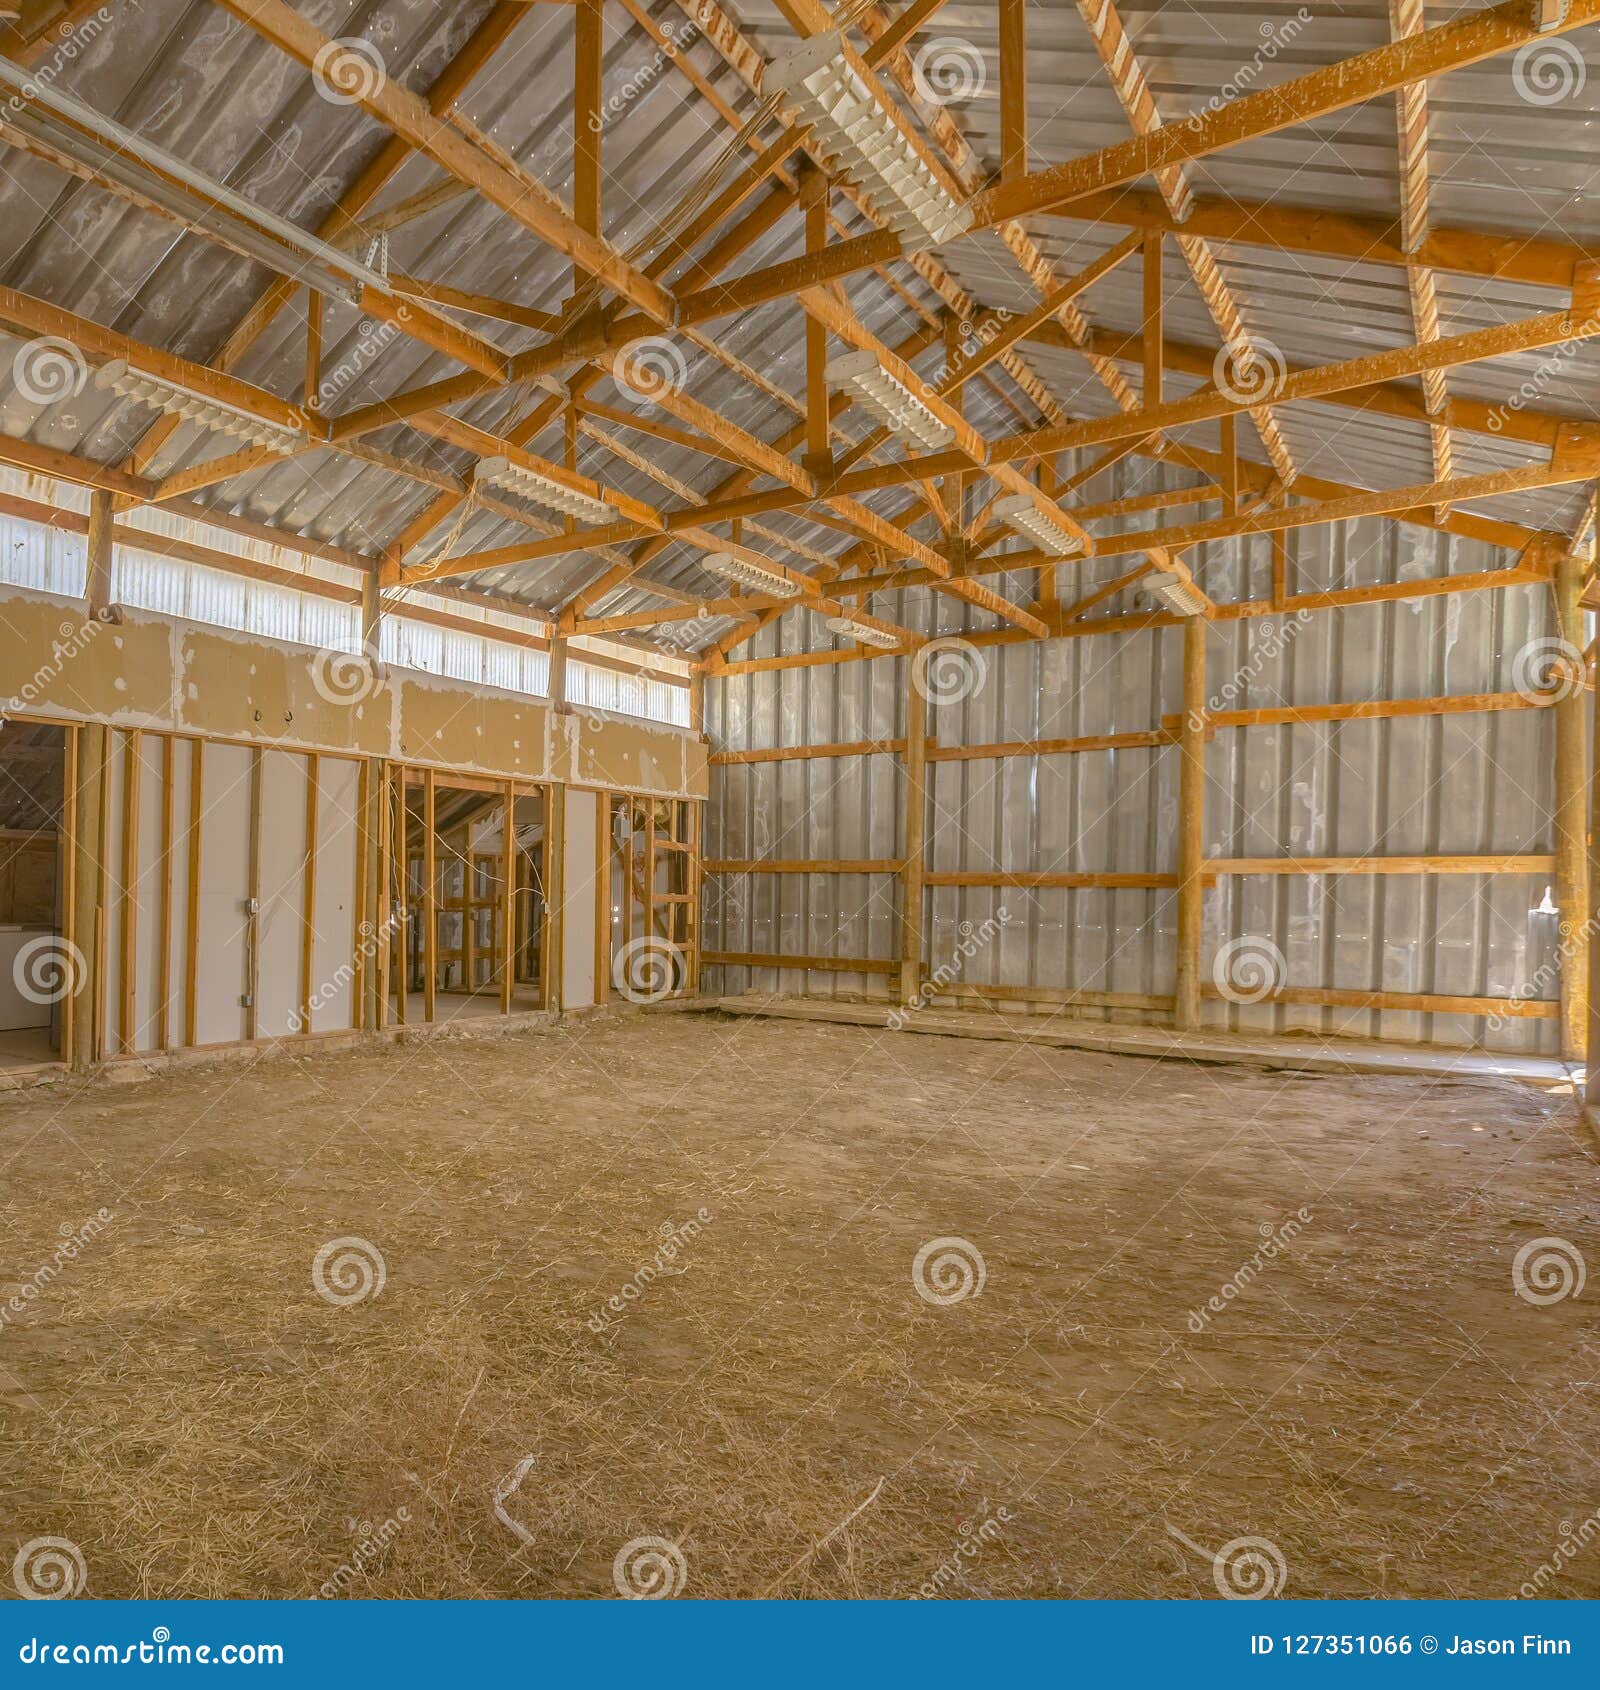 View Of A Barn Interior With Metal Roof And Wall Stock Photo